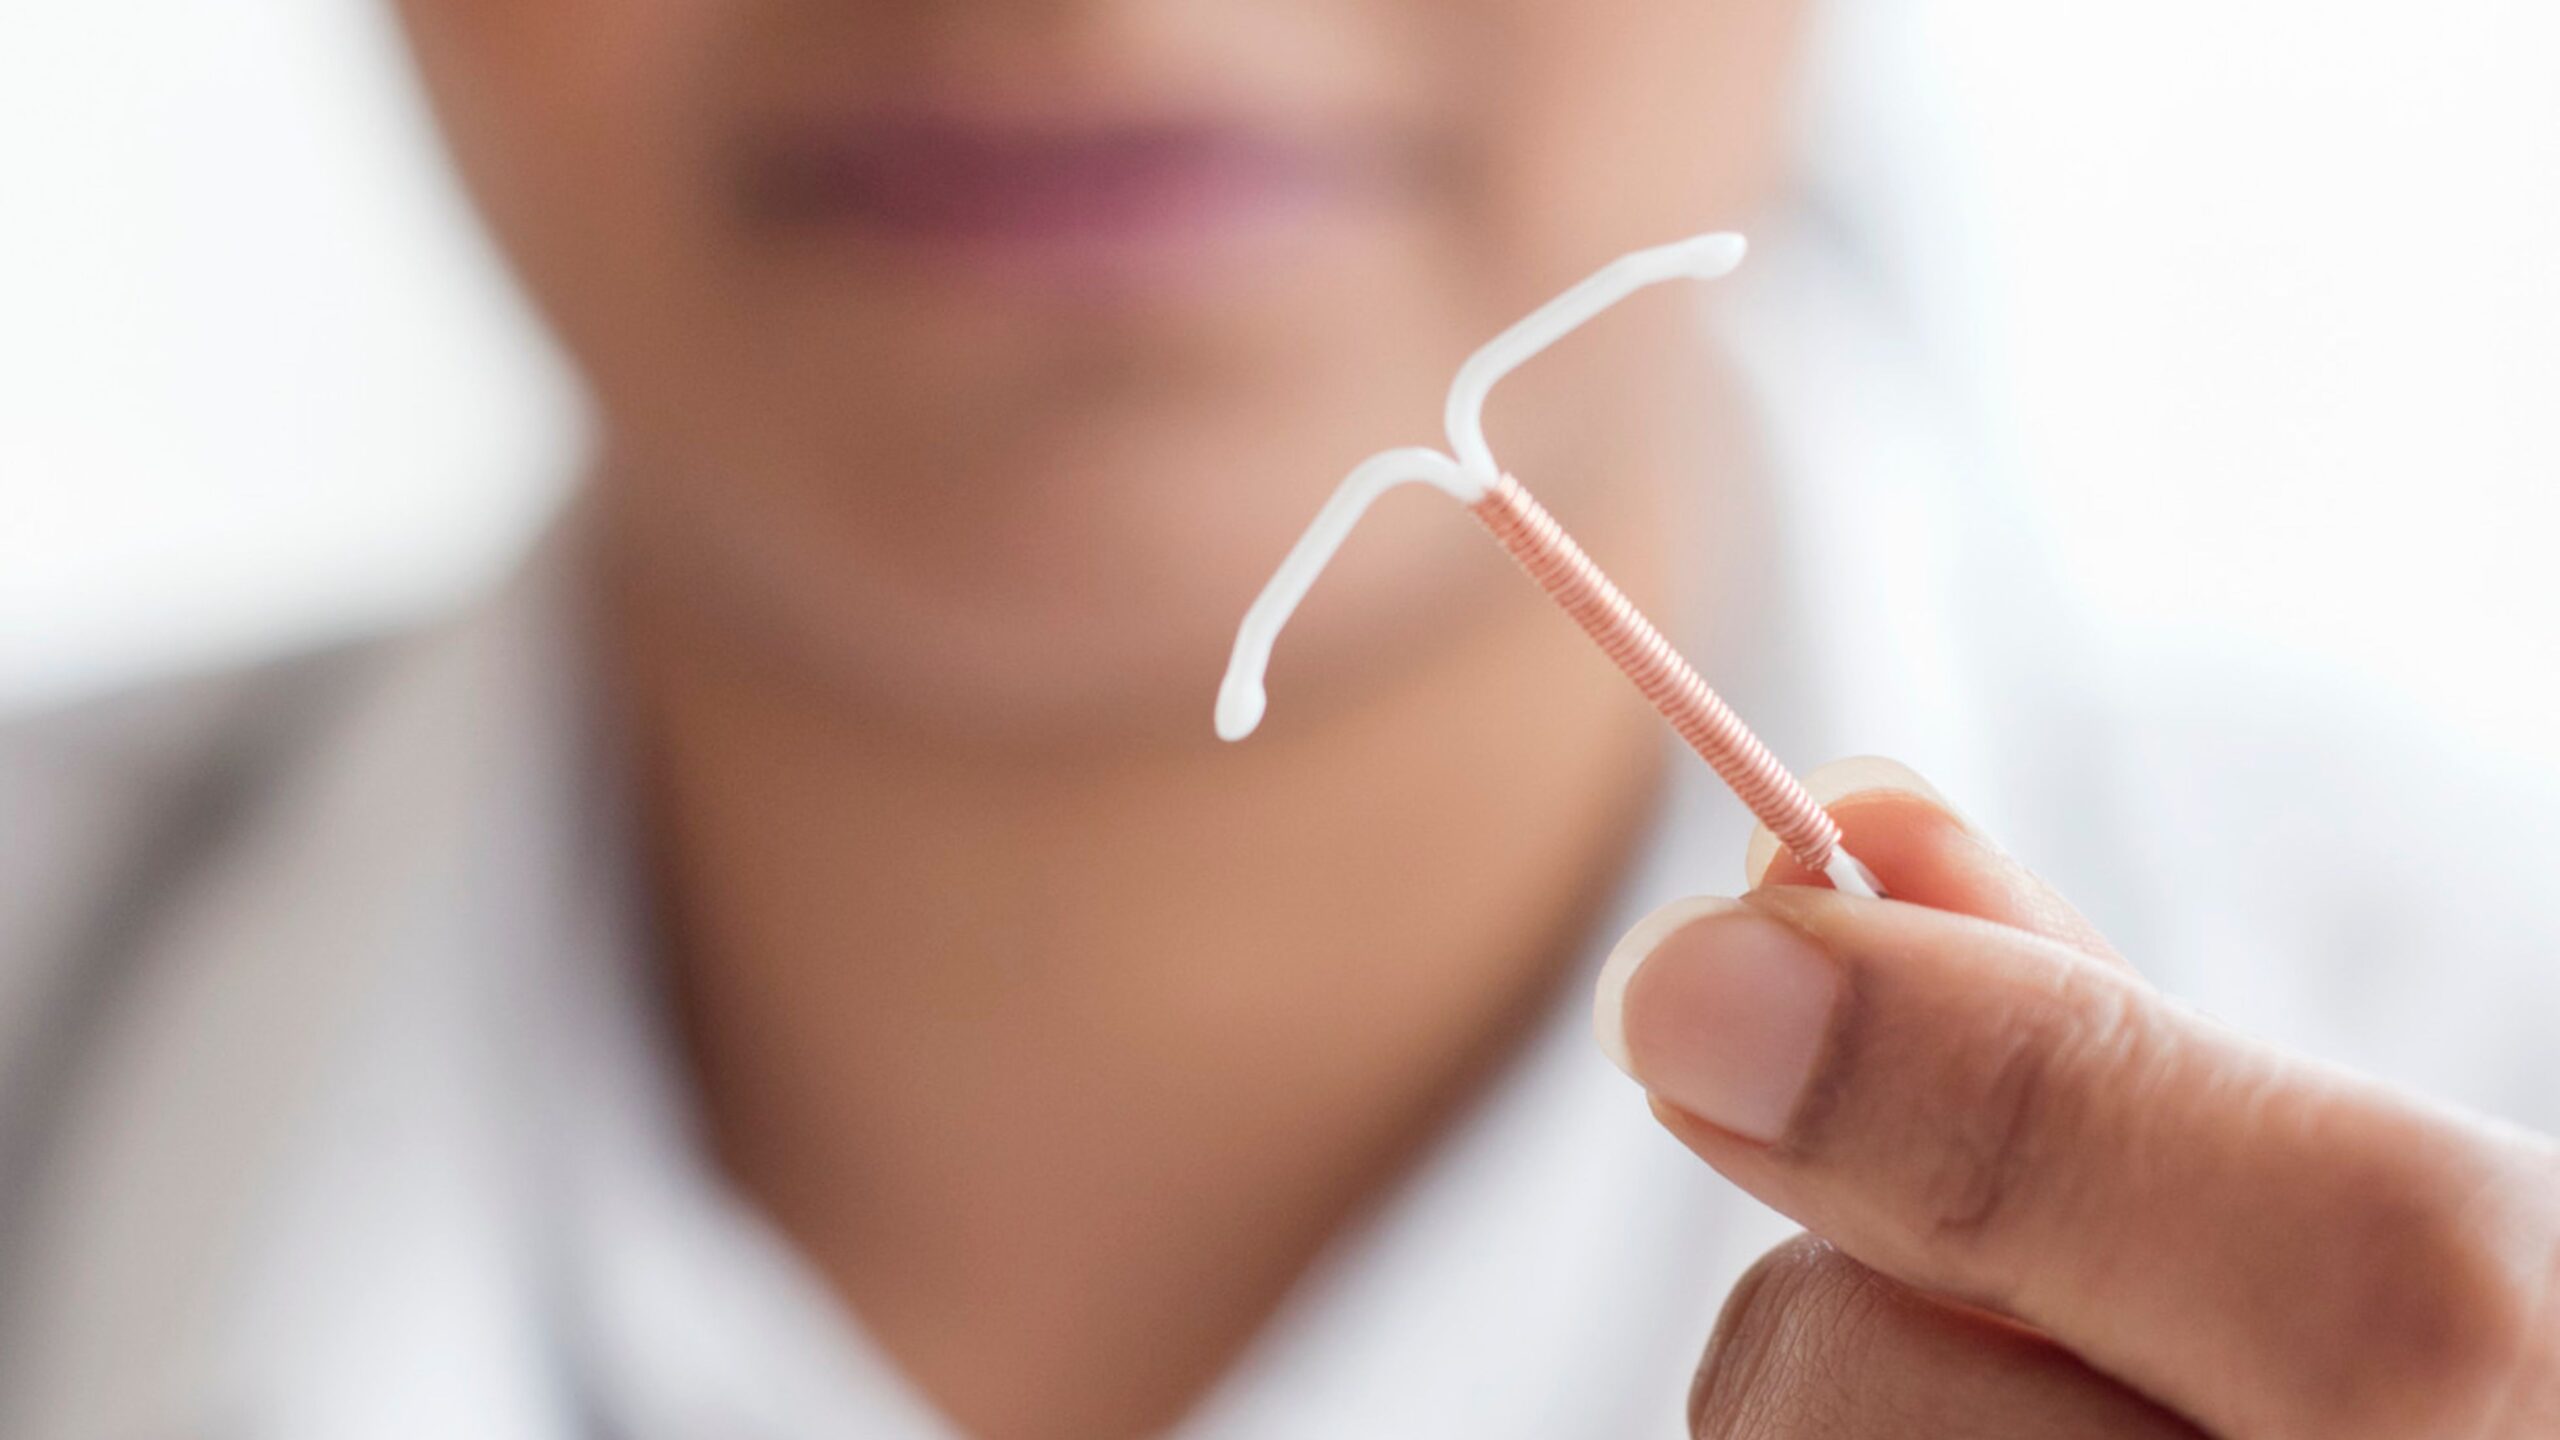 women's face faded in the background while she holds an IUD in one hand.